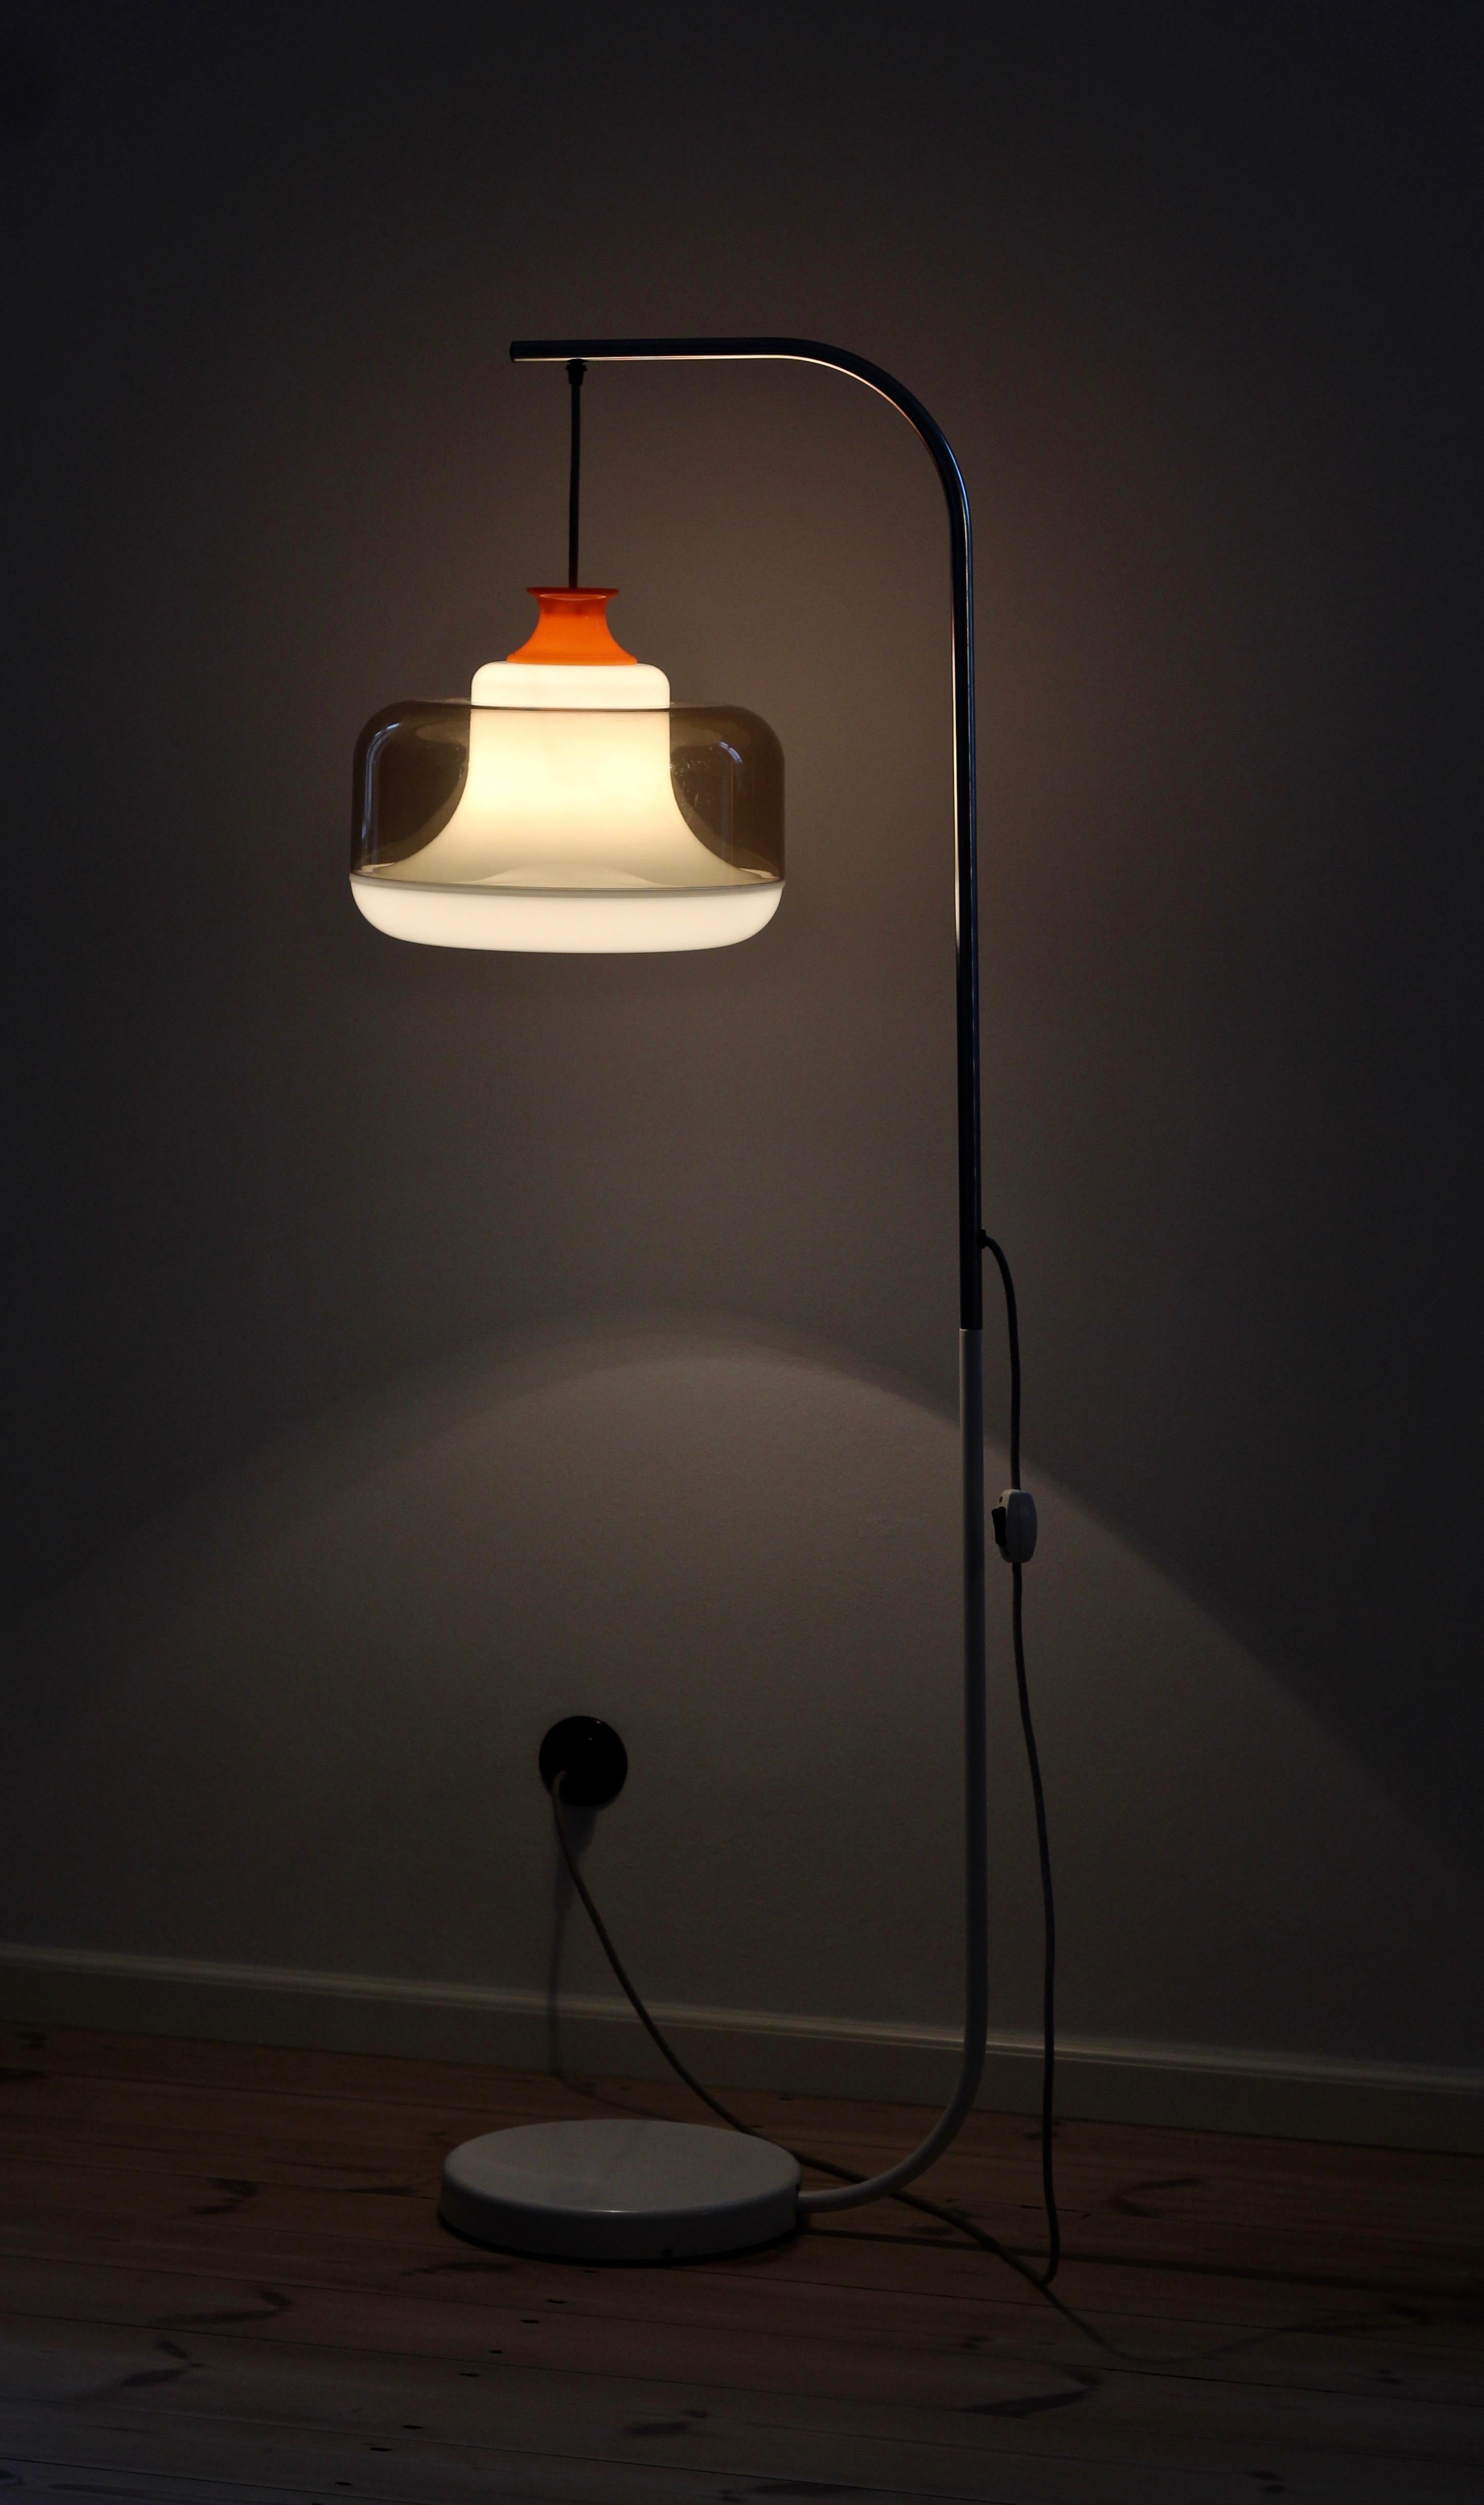 This 1960s floor lamp was made in Hungary. The lamp is in excellent condition - the white parts have been restored and do not have any spatter or scratches, the upper part of the arm is in equally excellent condition. The cable has been replaced